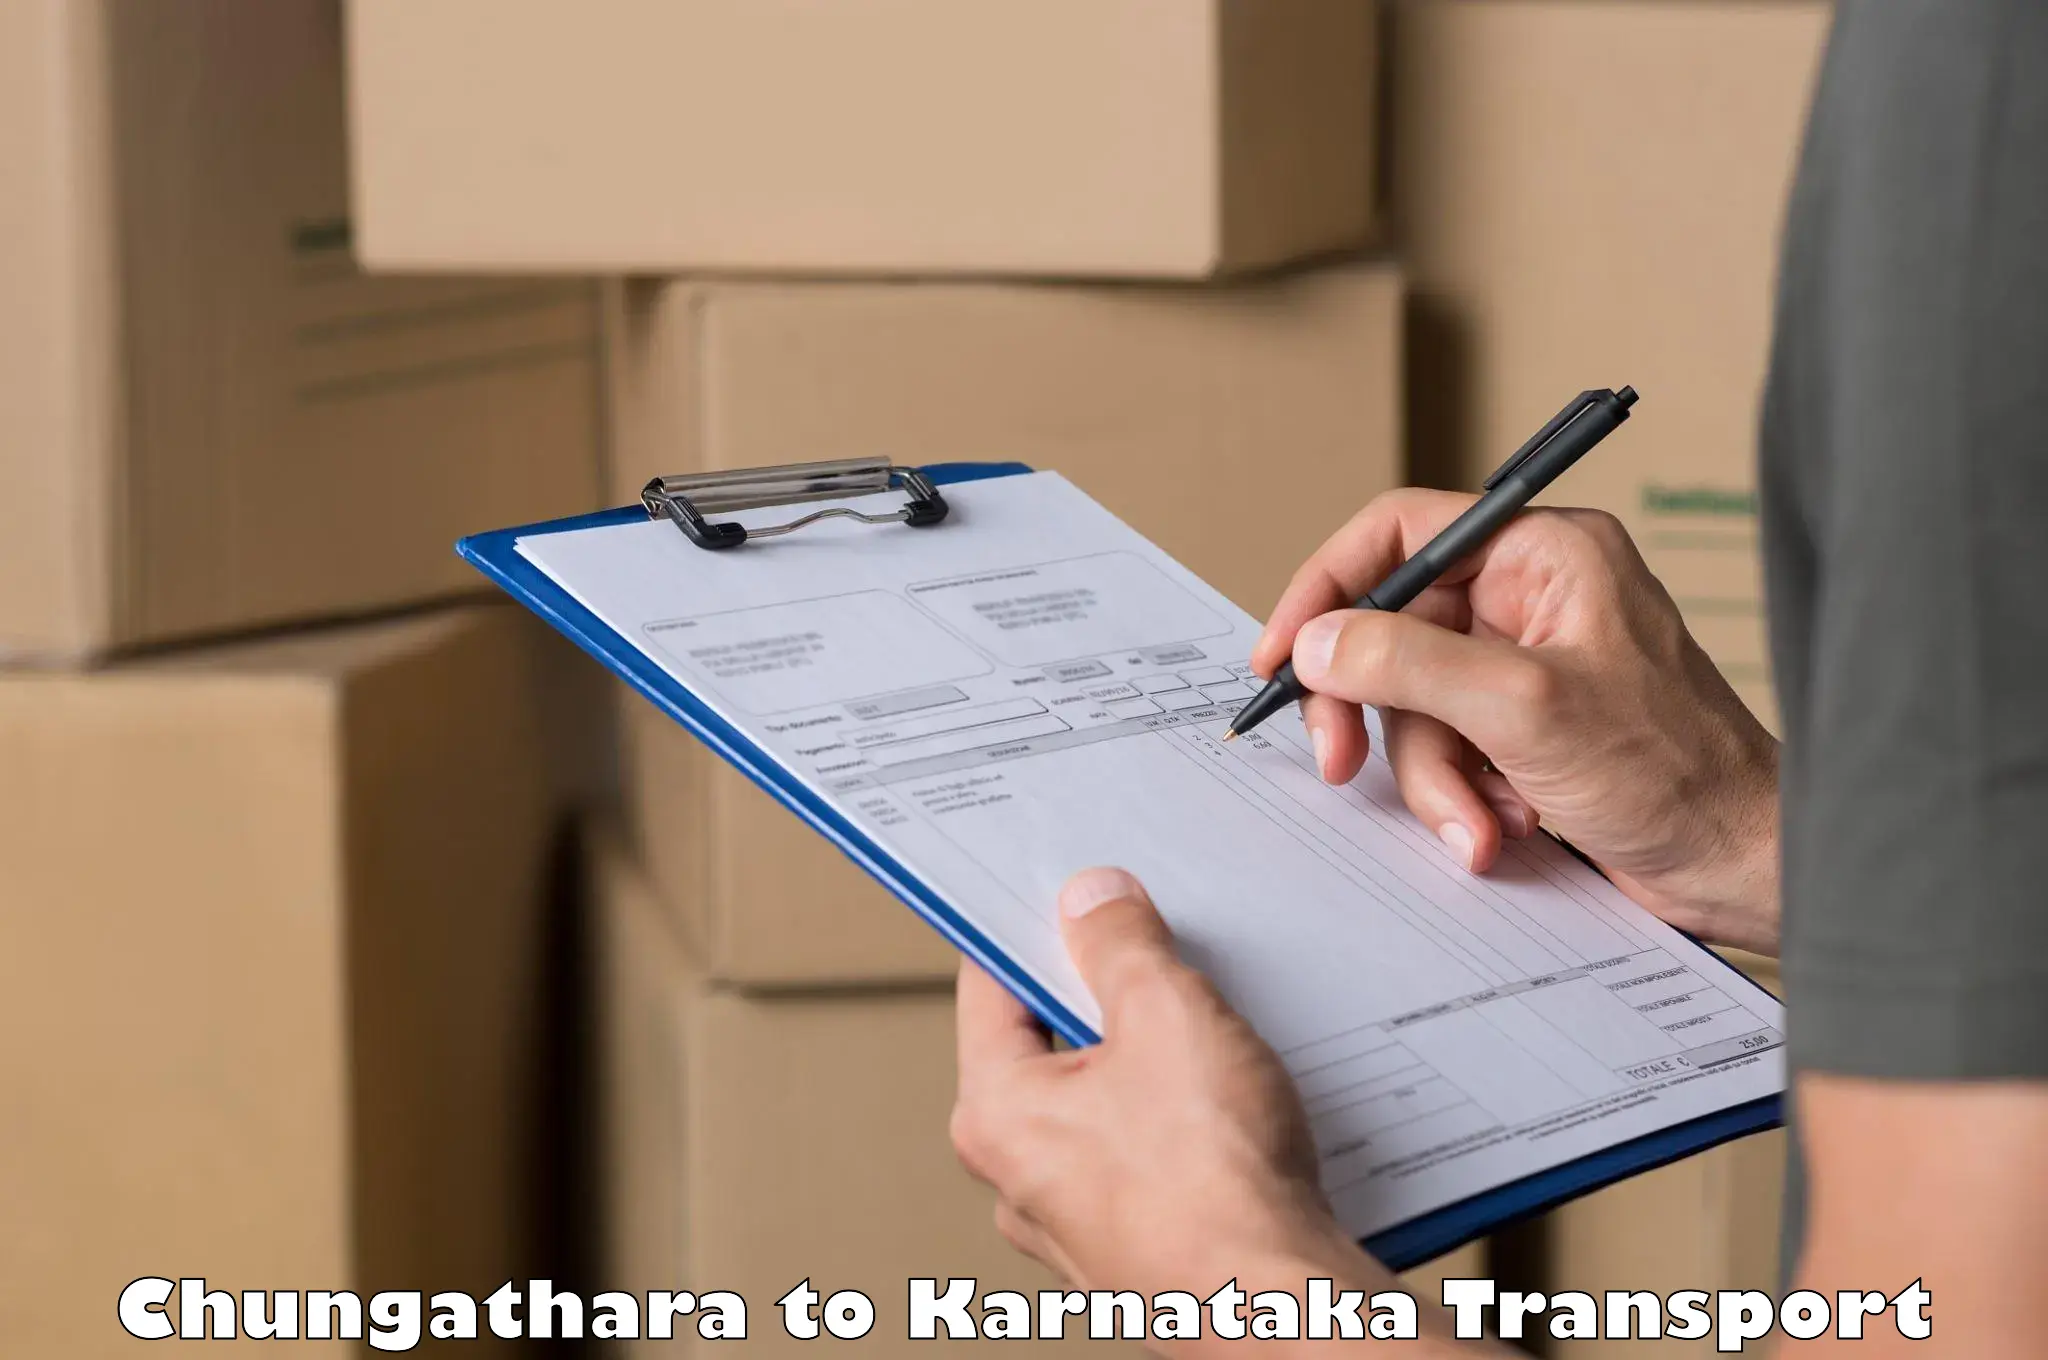 Truck transport companies in India Chungathara to Chittapur